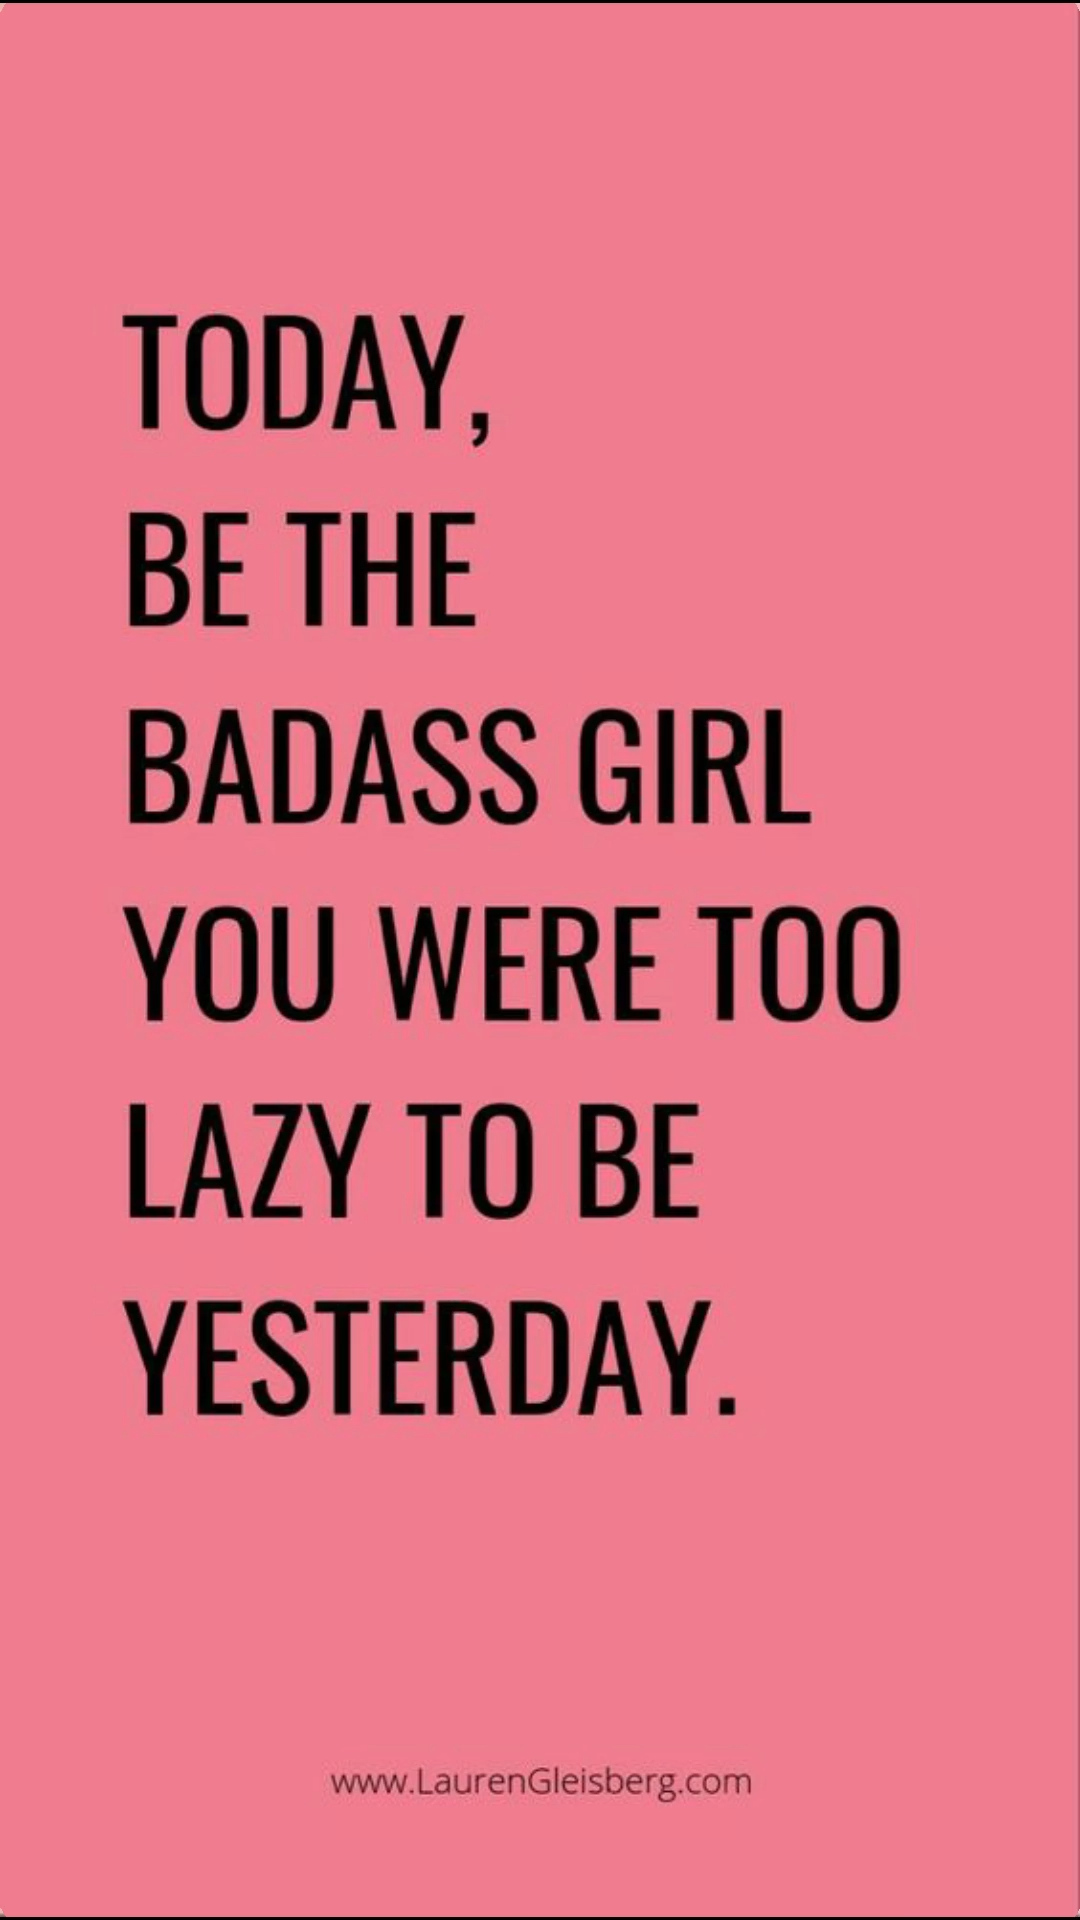 Motivational Quotes for Women | Quotations - Motivational Quotes for Women | Quotations -   17 fitness Quotes crossfit ideas